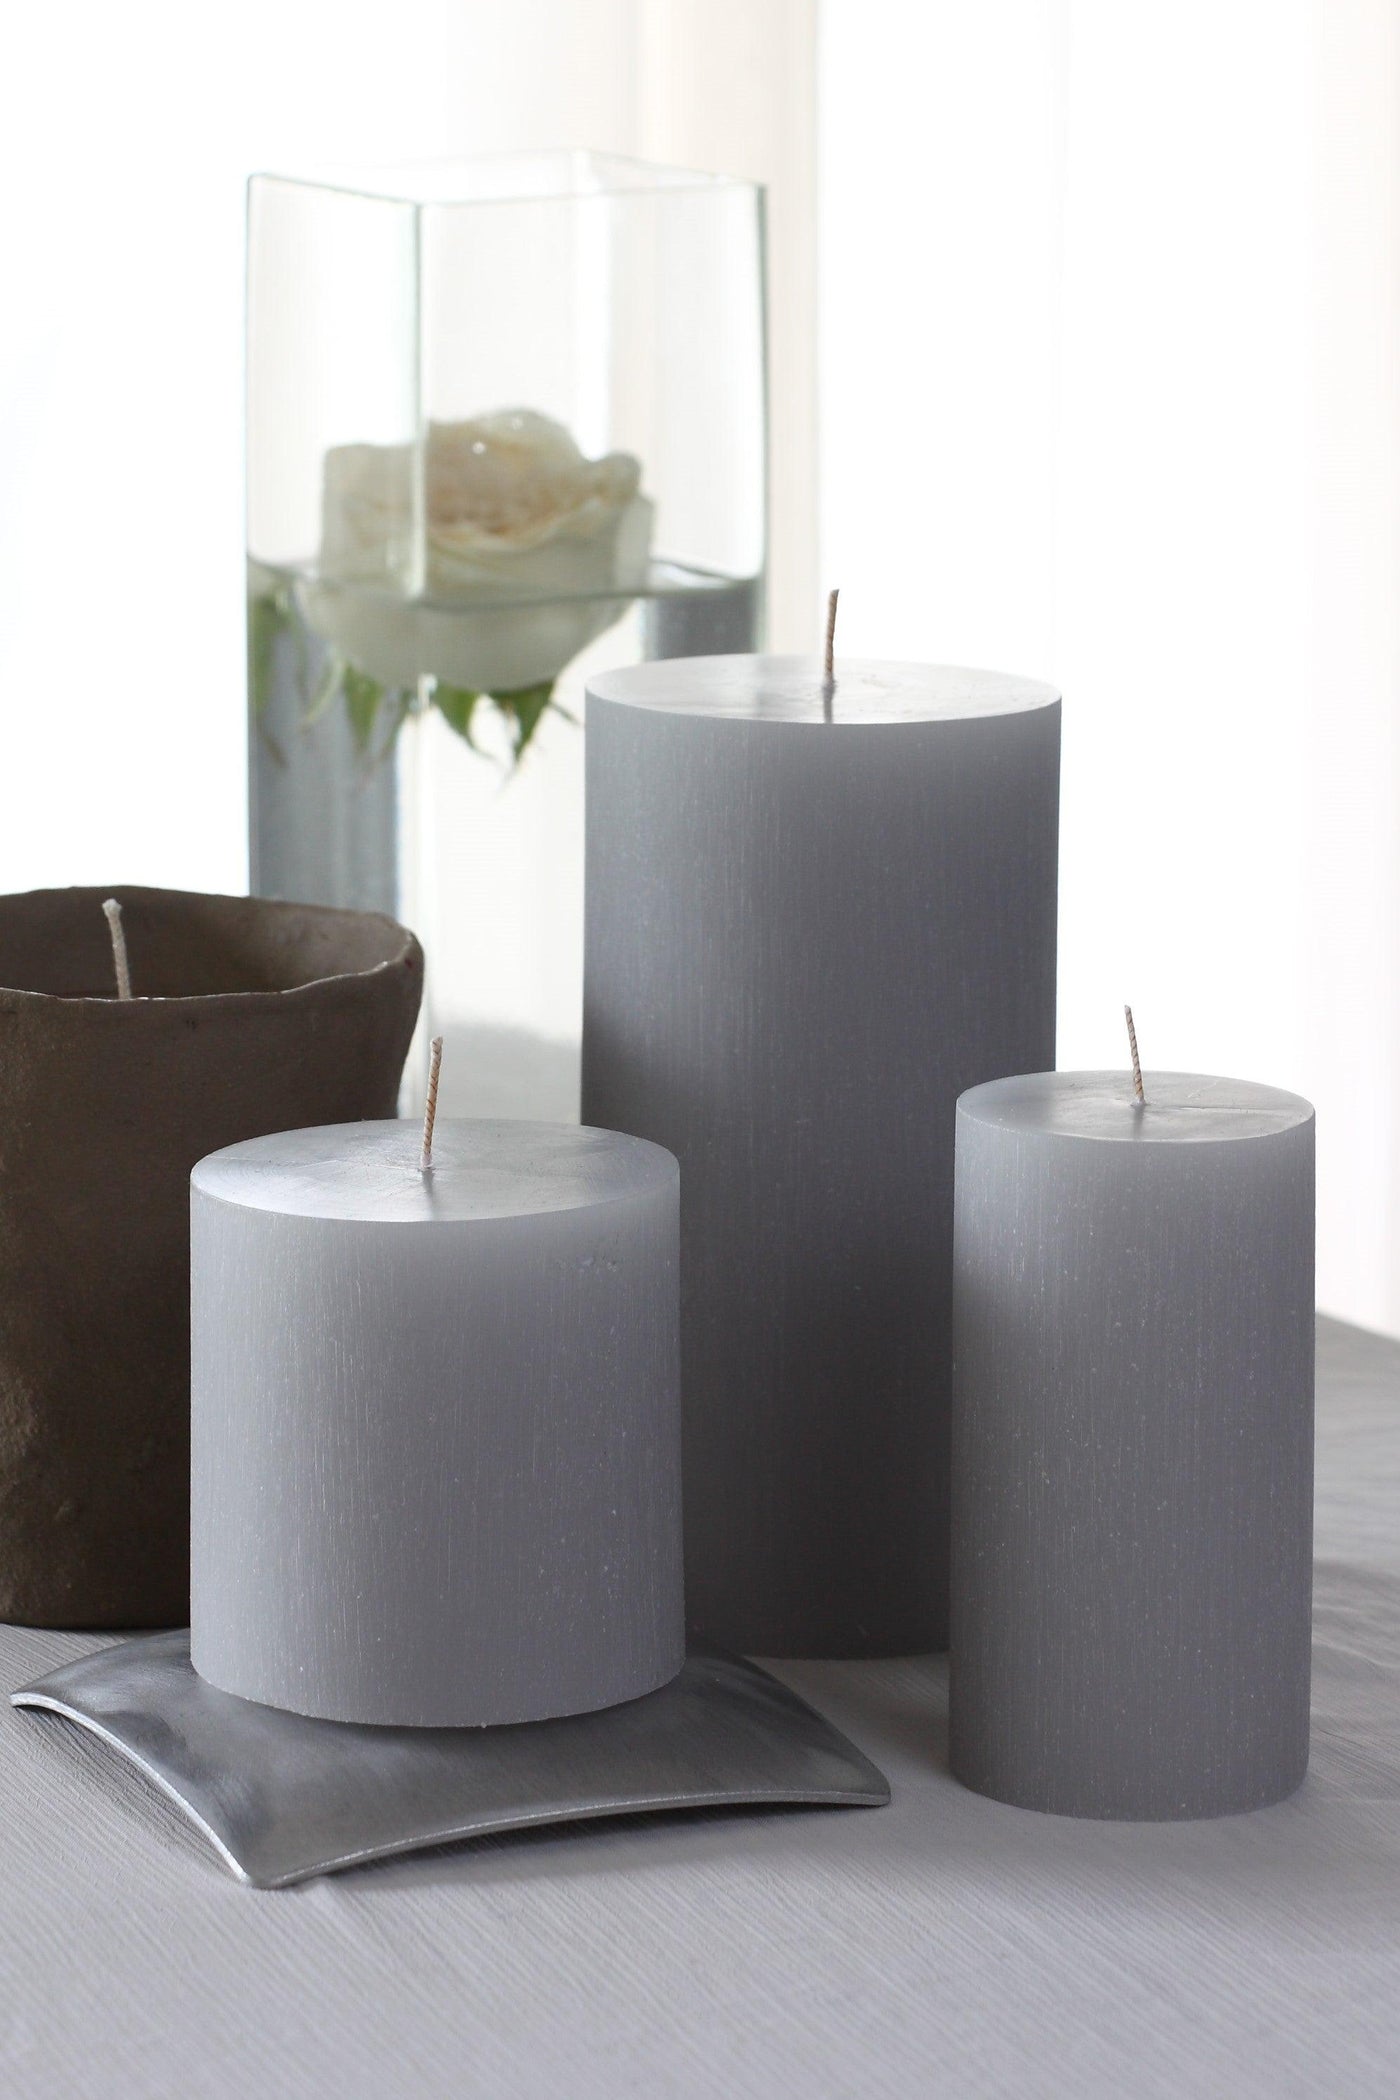 Grey Pure Pillar Candles Tall (Set of 6)-Comfort-CANDLES, GIFTS, SUSTAINABLE DECOR-Forest Homes-Nature inspired decor-Nature decor